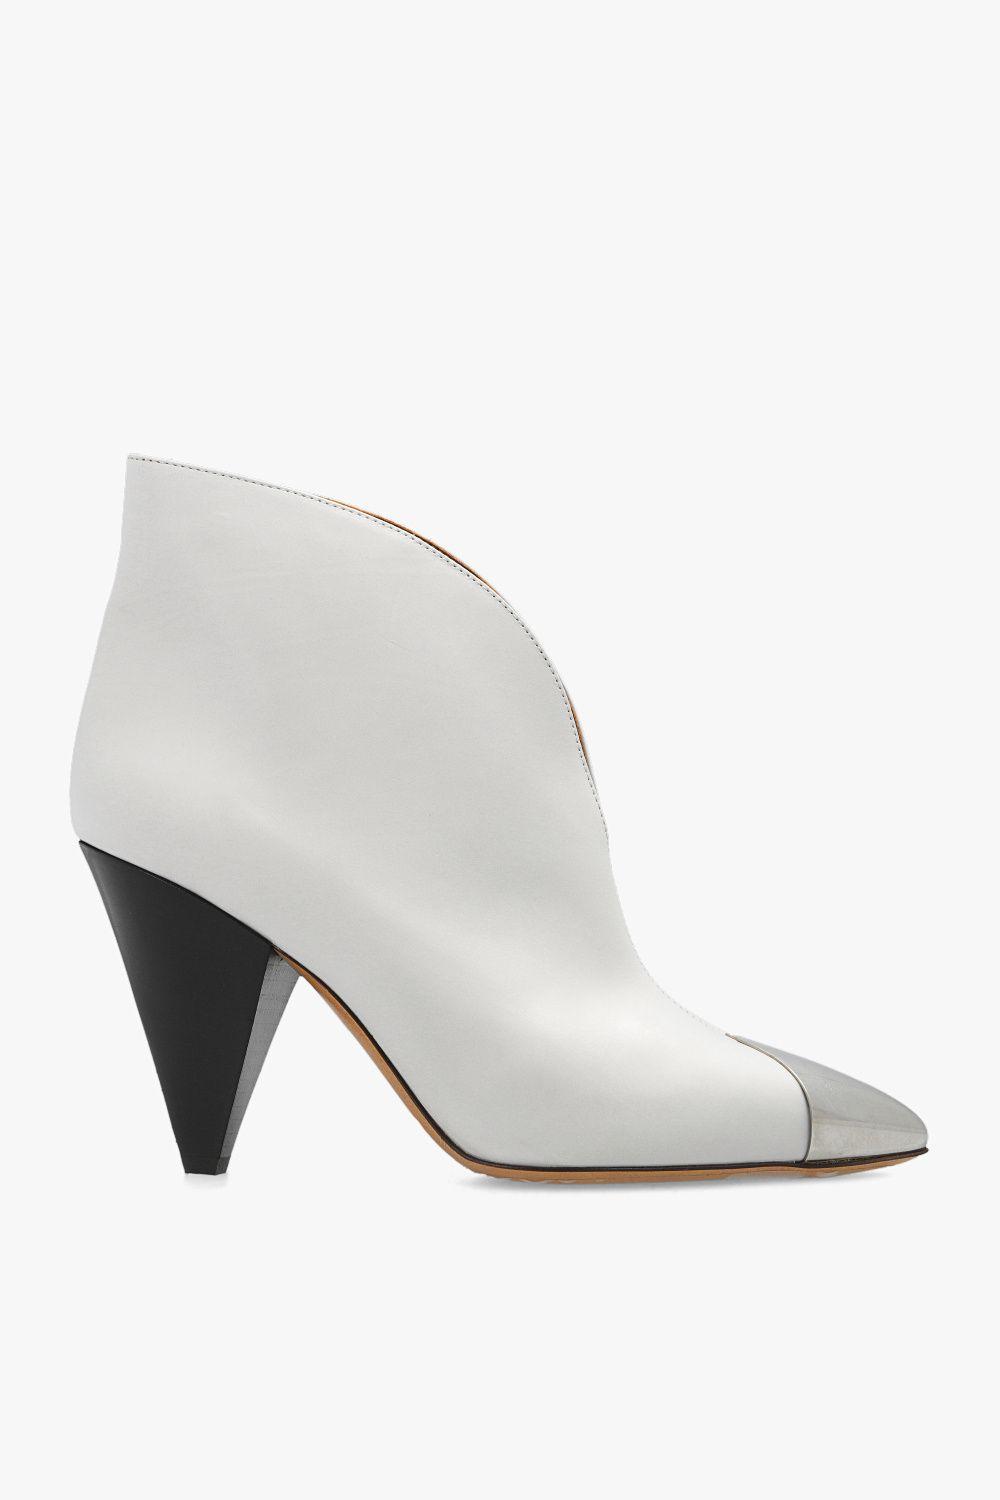 Isabel Marant 'adsie' Heeled Ankle Boots in White | Lyst